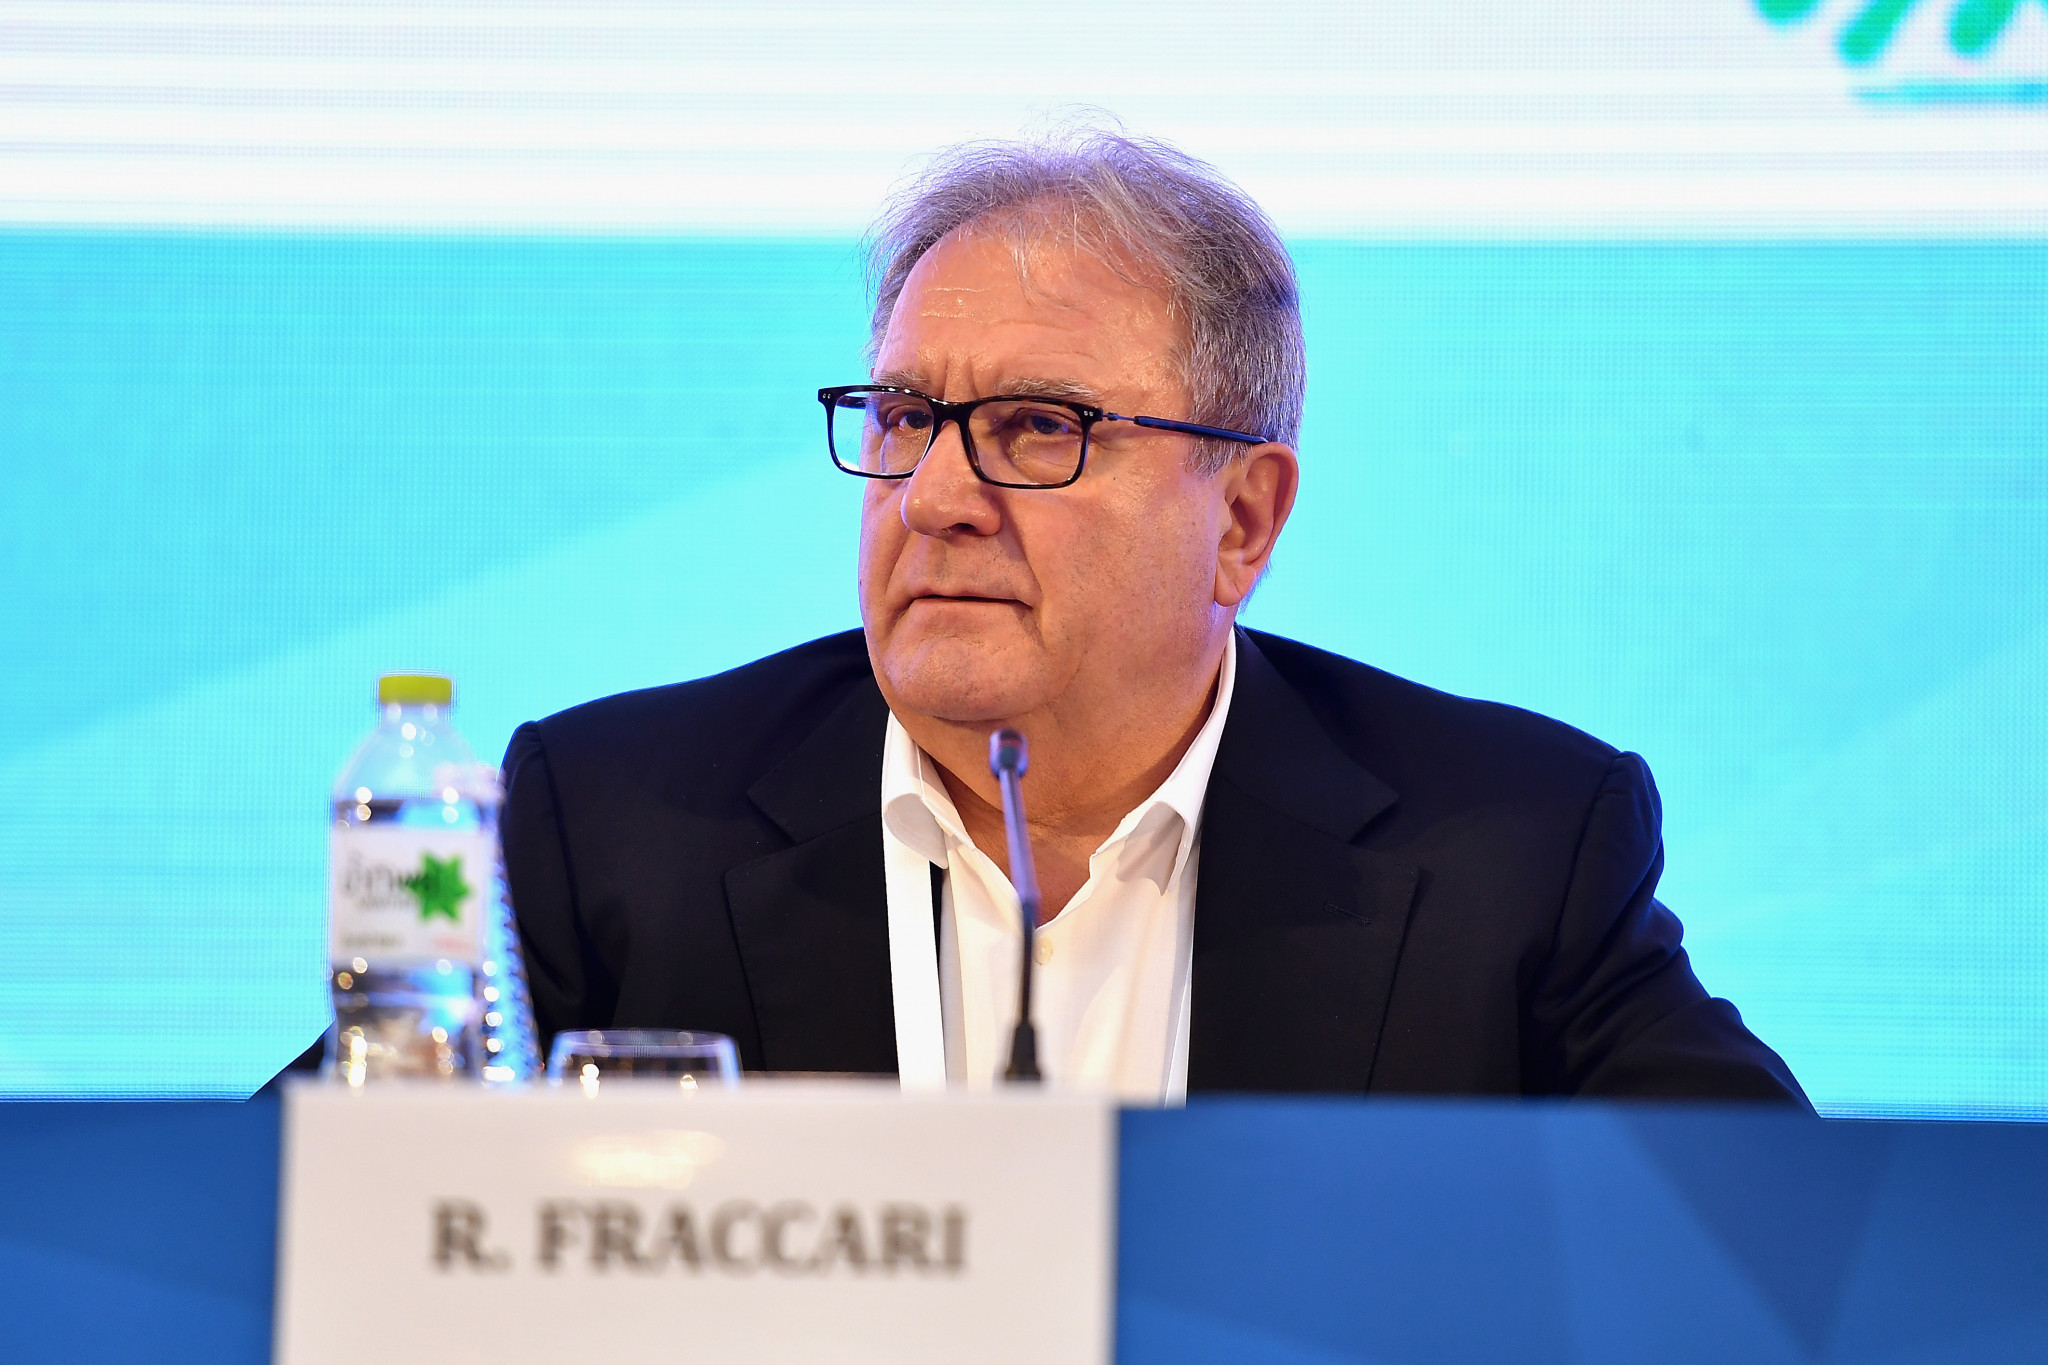 Riccardo Fraccari has said 2019 will be the biggest year in the history of baseball/softball ©Getty Images